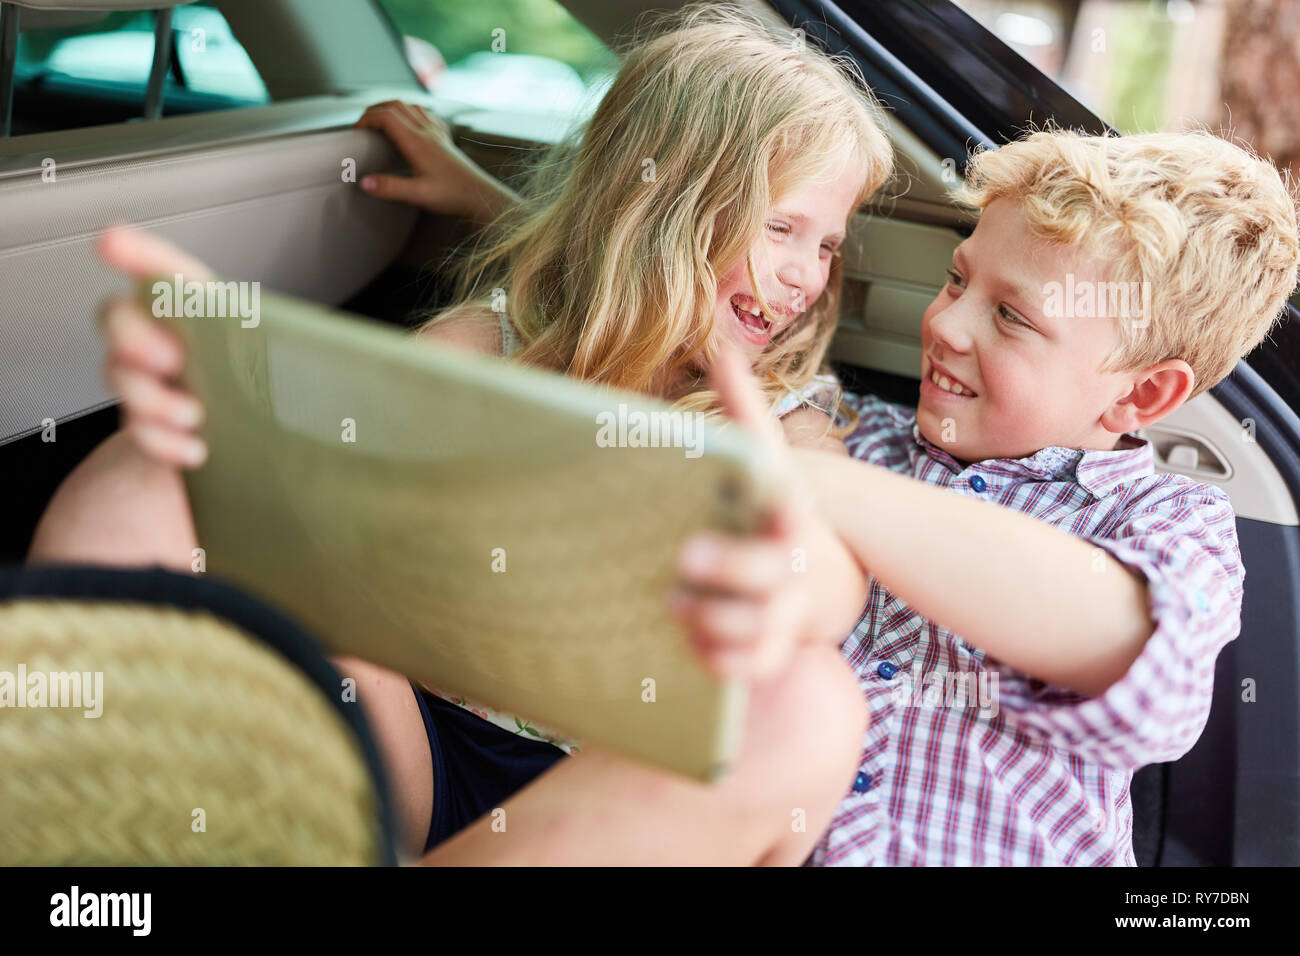 Sibling couple is having fun in the car while playing with the tablet computer Stock Photo